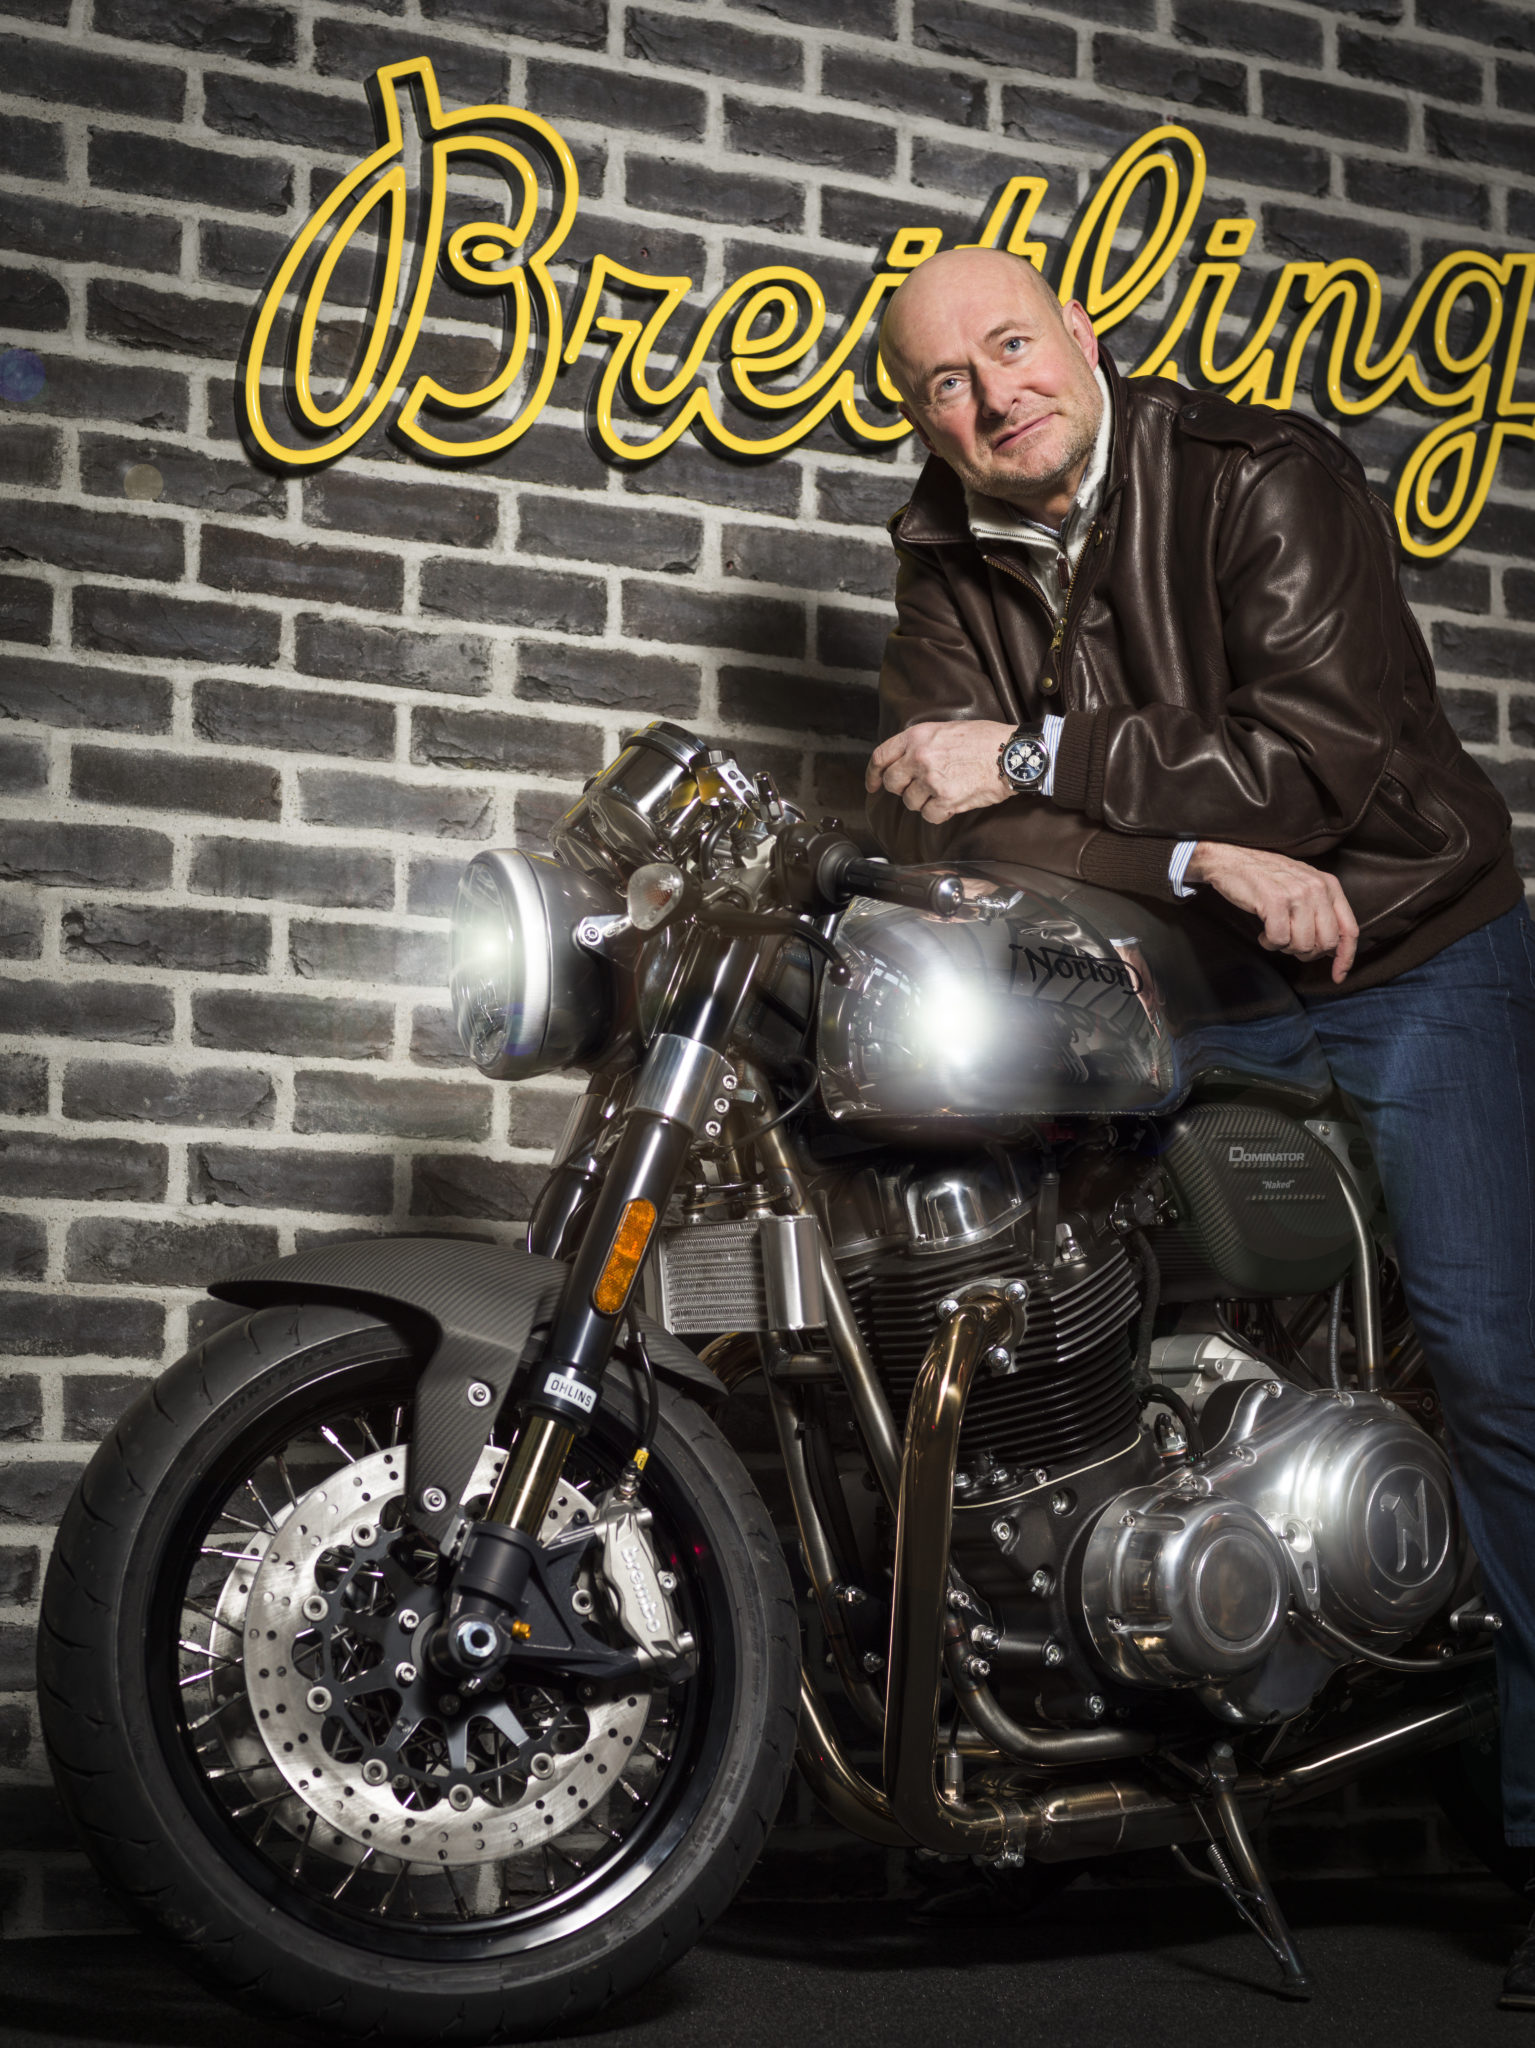 Breitling ceo mr georges kern and a norton commando motorcycle 02